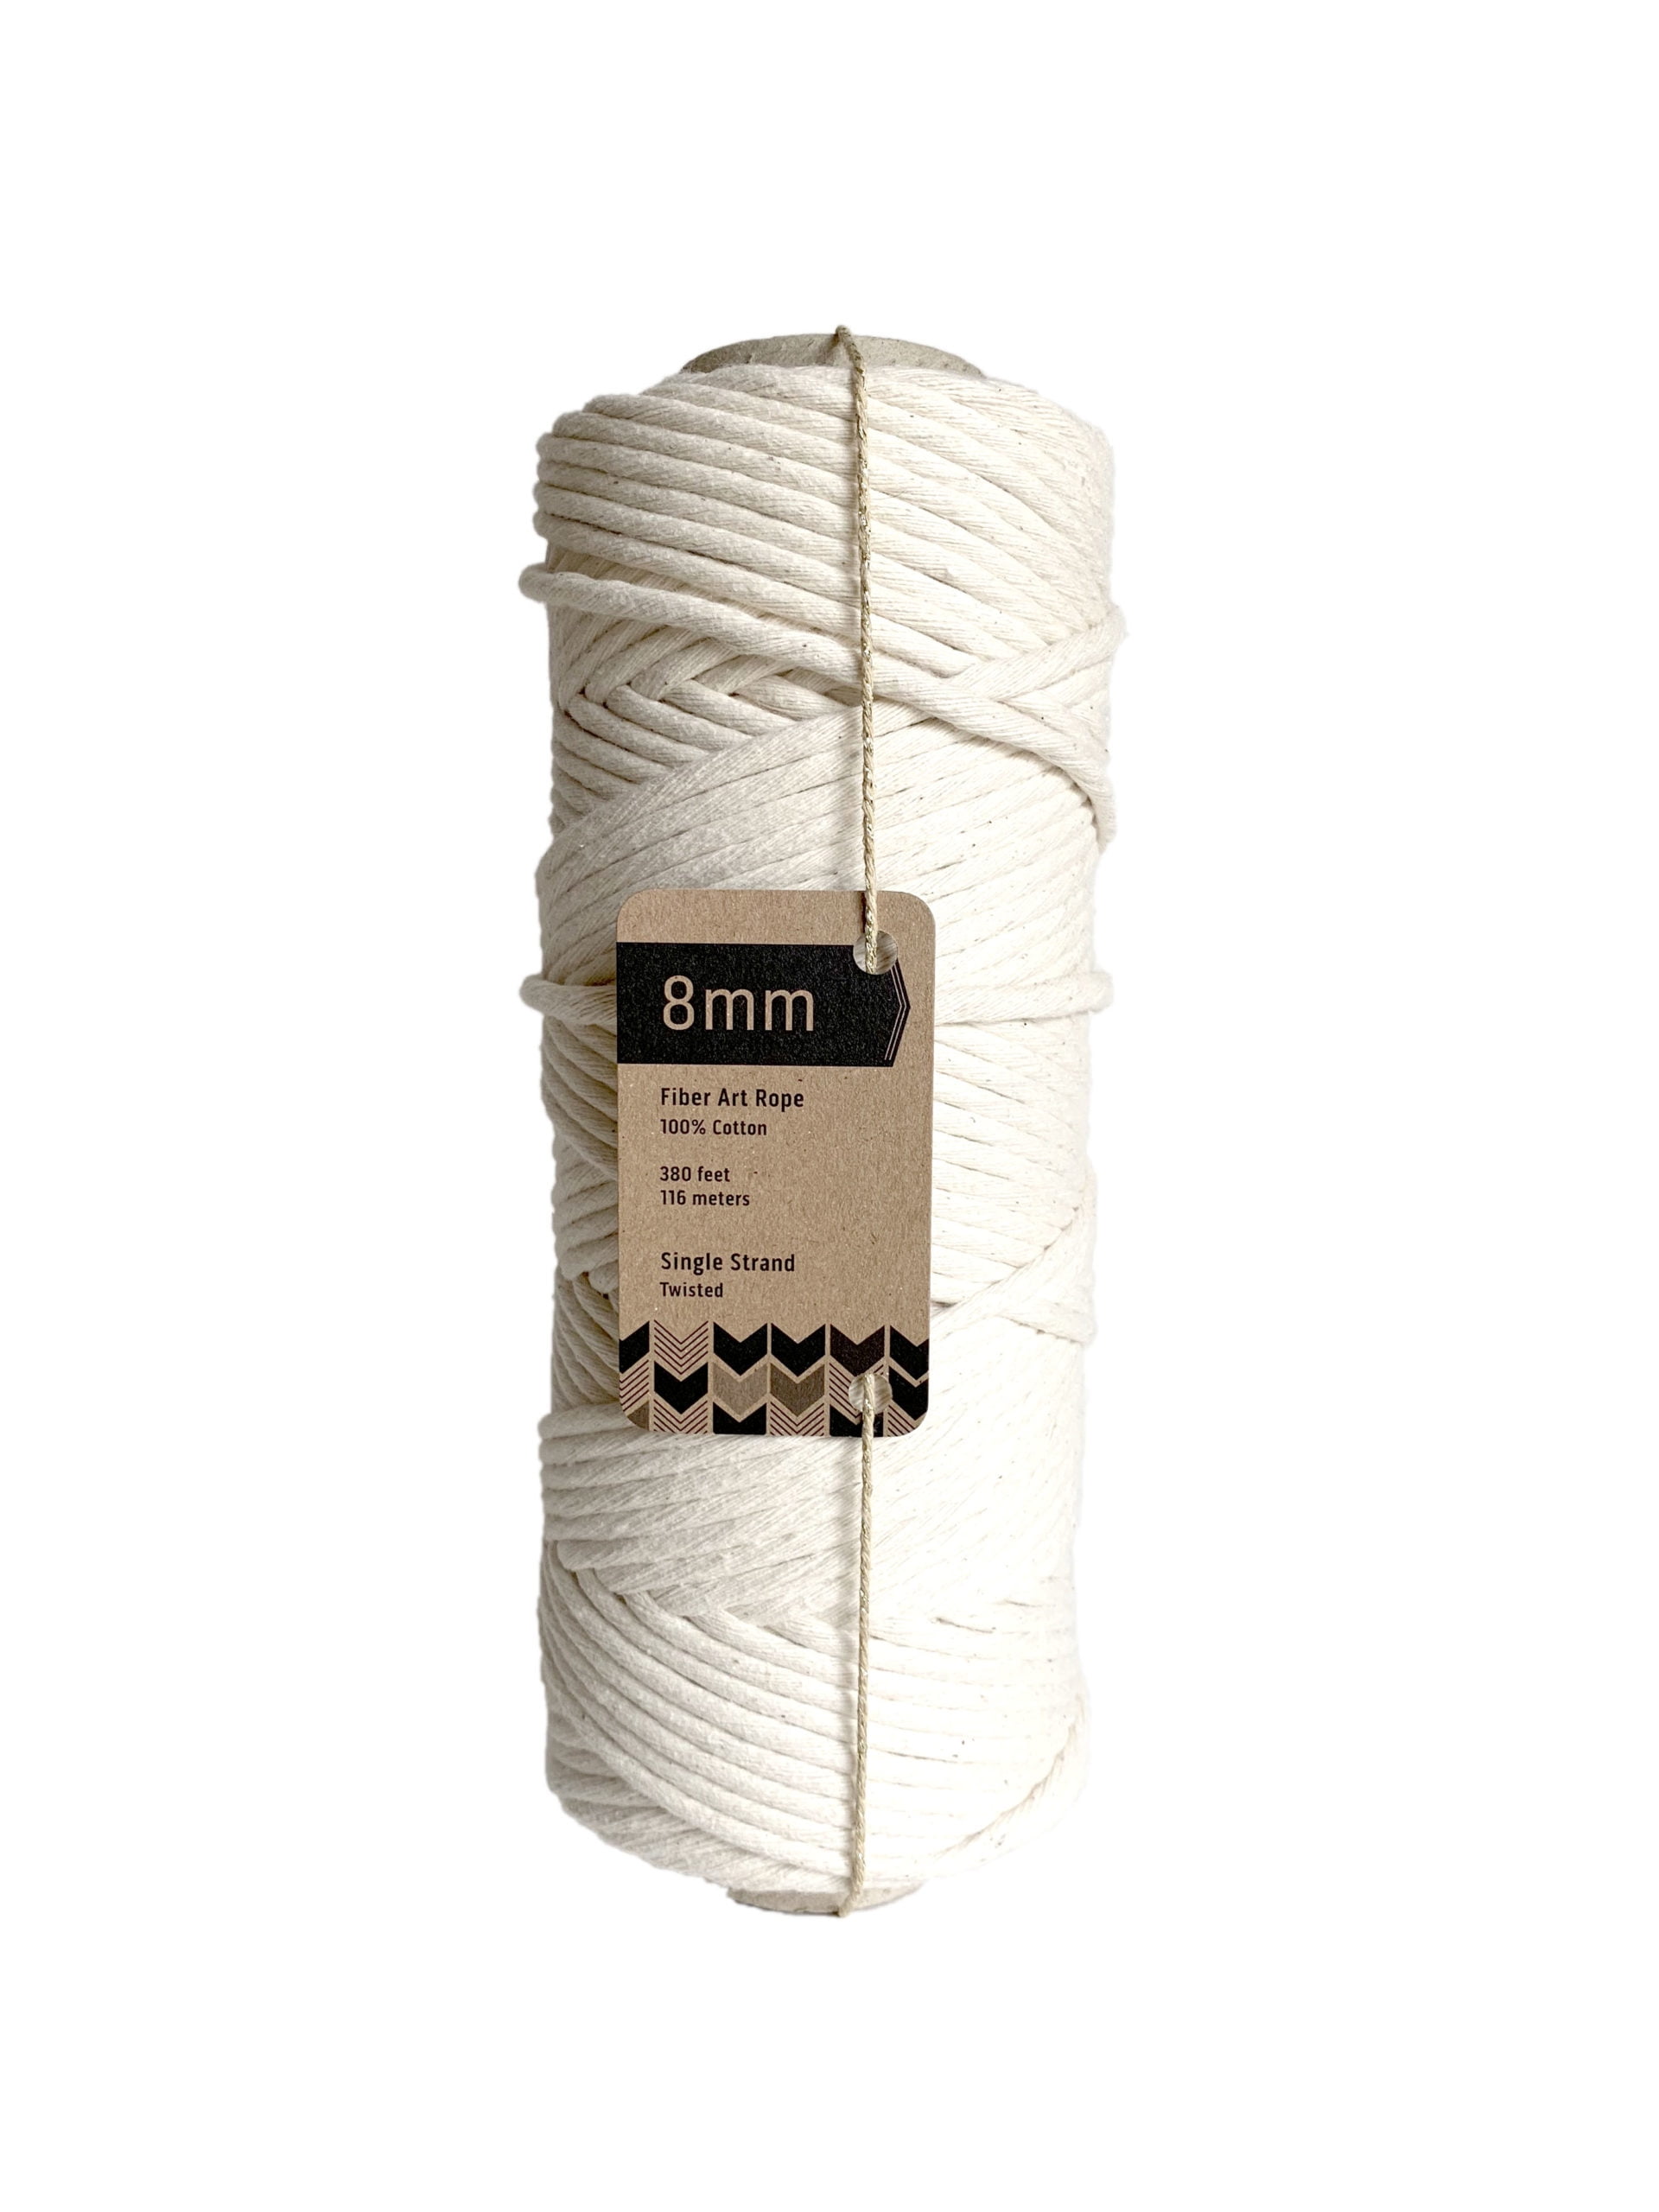 Blisstime Macrame Cord 3mm X 500Yards |Natural Cotton Macrame Rope|3 Strand Twisted Cotton Cord Decorative Projects Knitting Soft Undyed Cotton Rope for Wall Hangings Crafts Plant Hangers